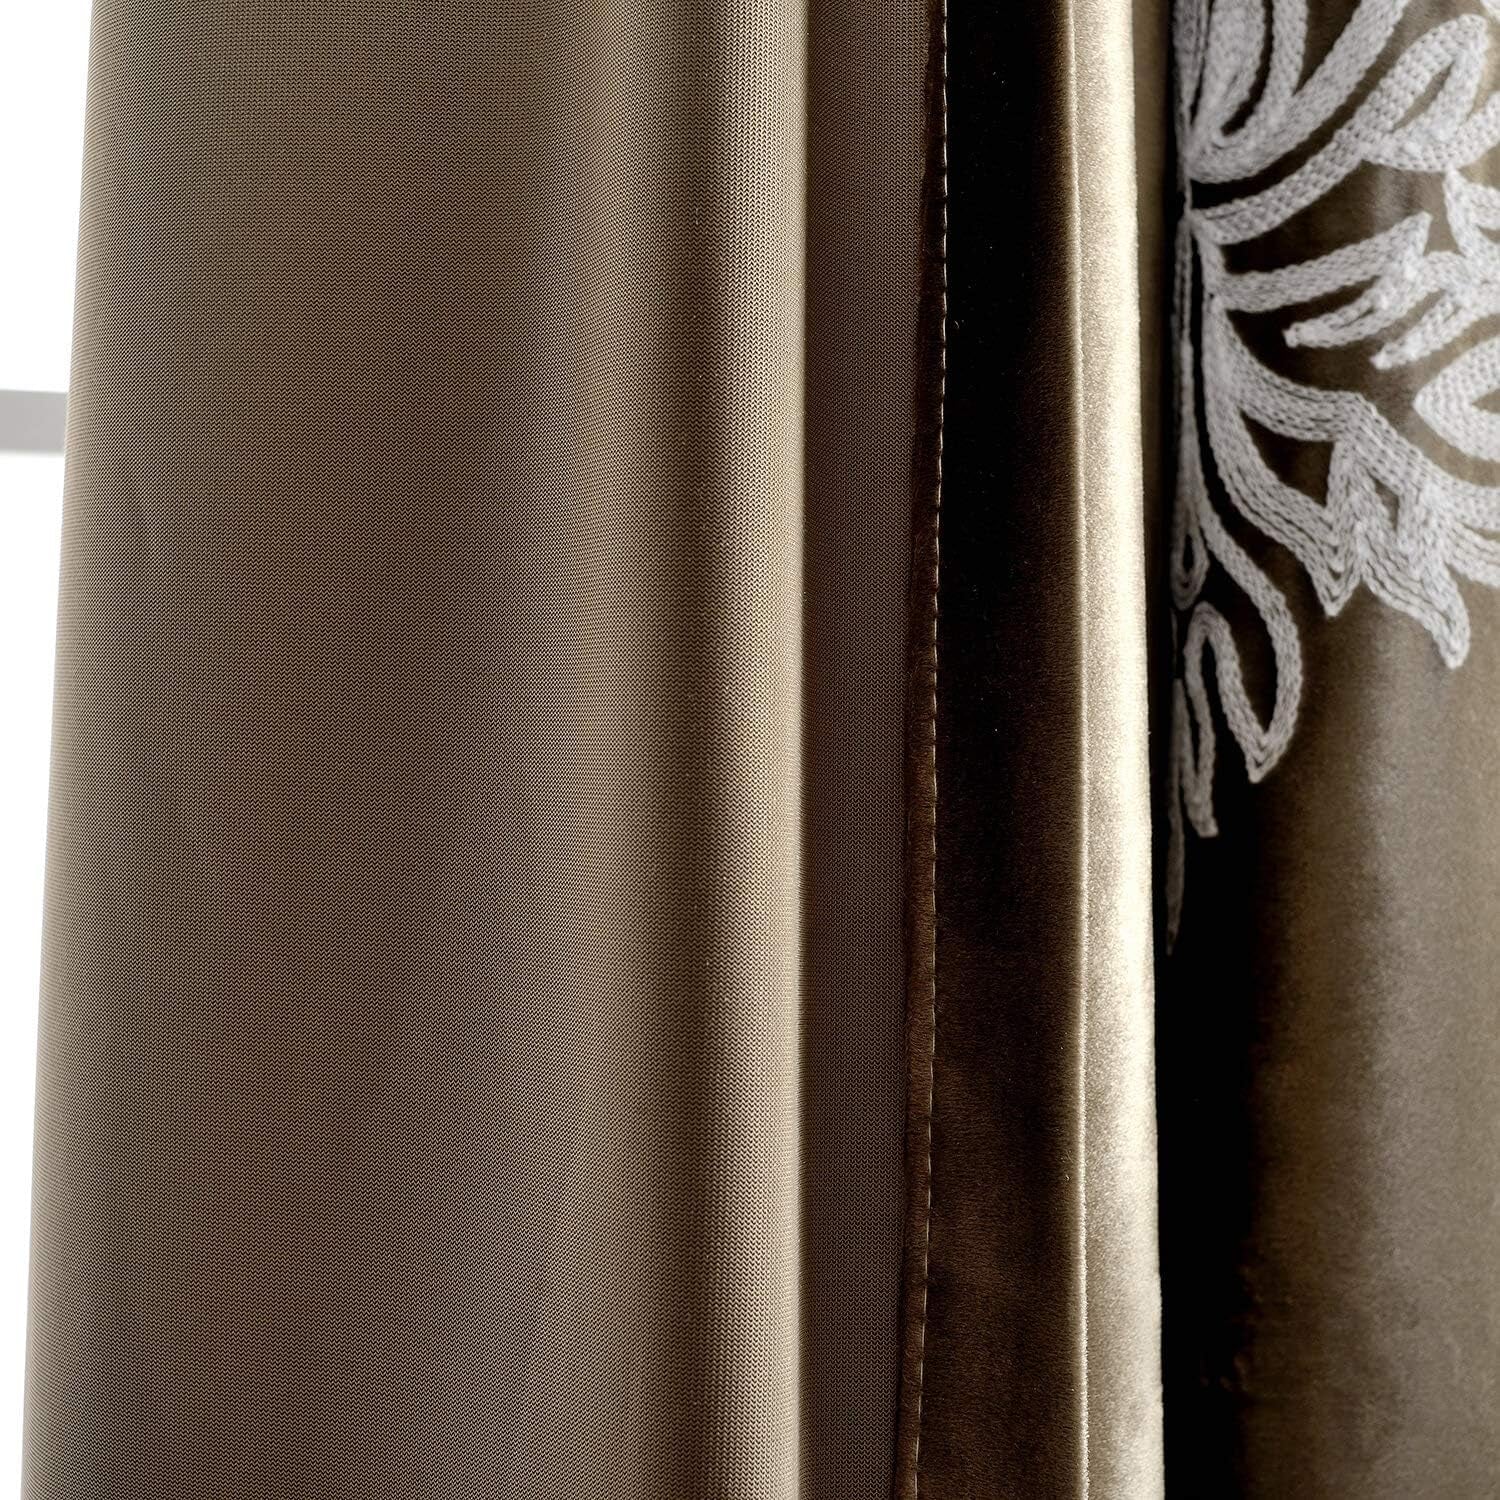 2 Panels European Floral Embroidered Curtains, Blackout Velvet, 52 by 63 Inch, Chocolate Brown